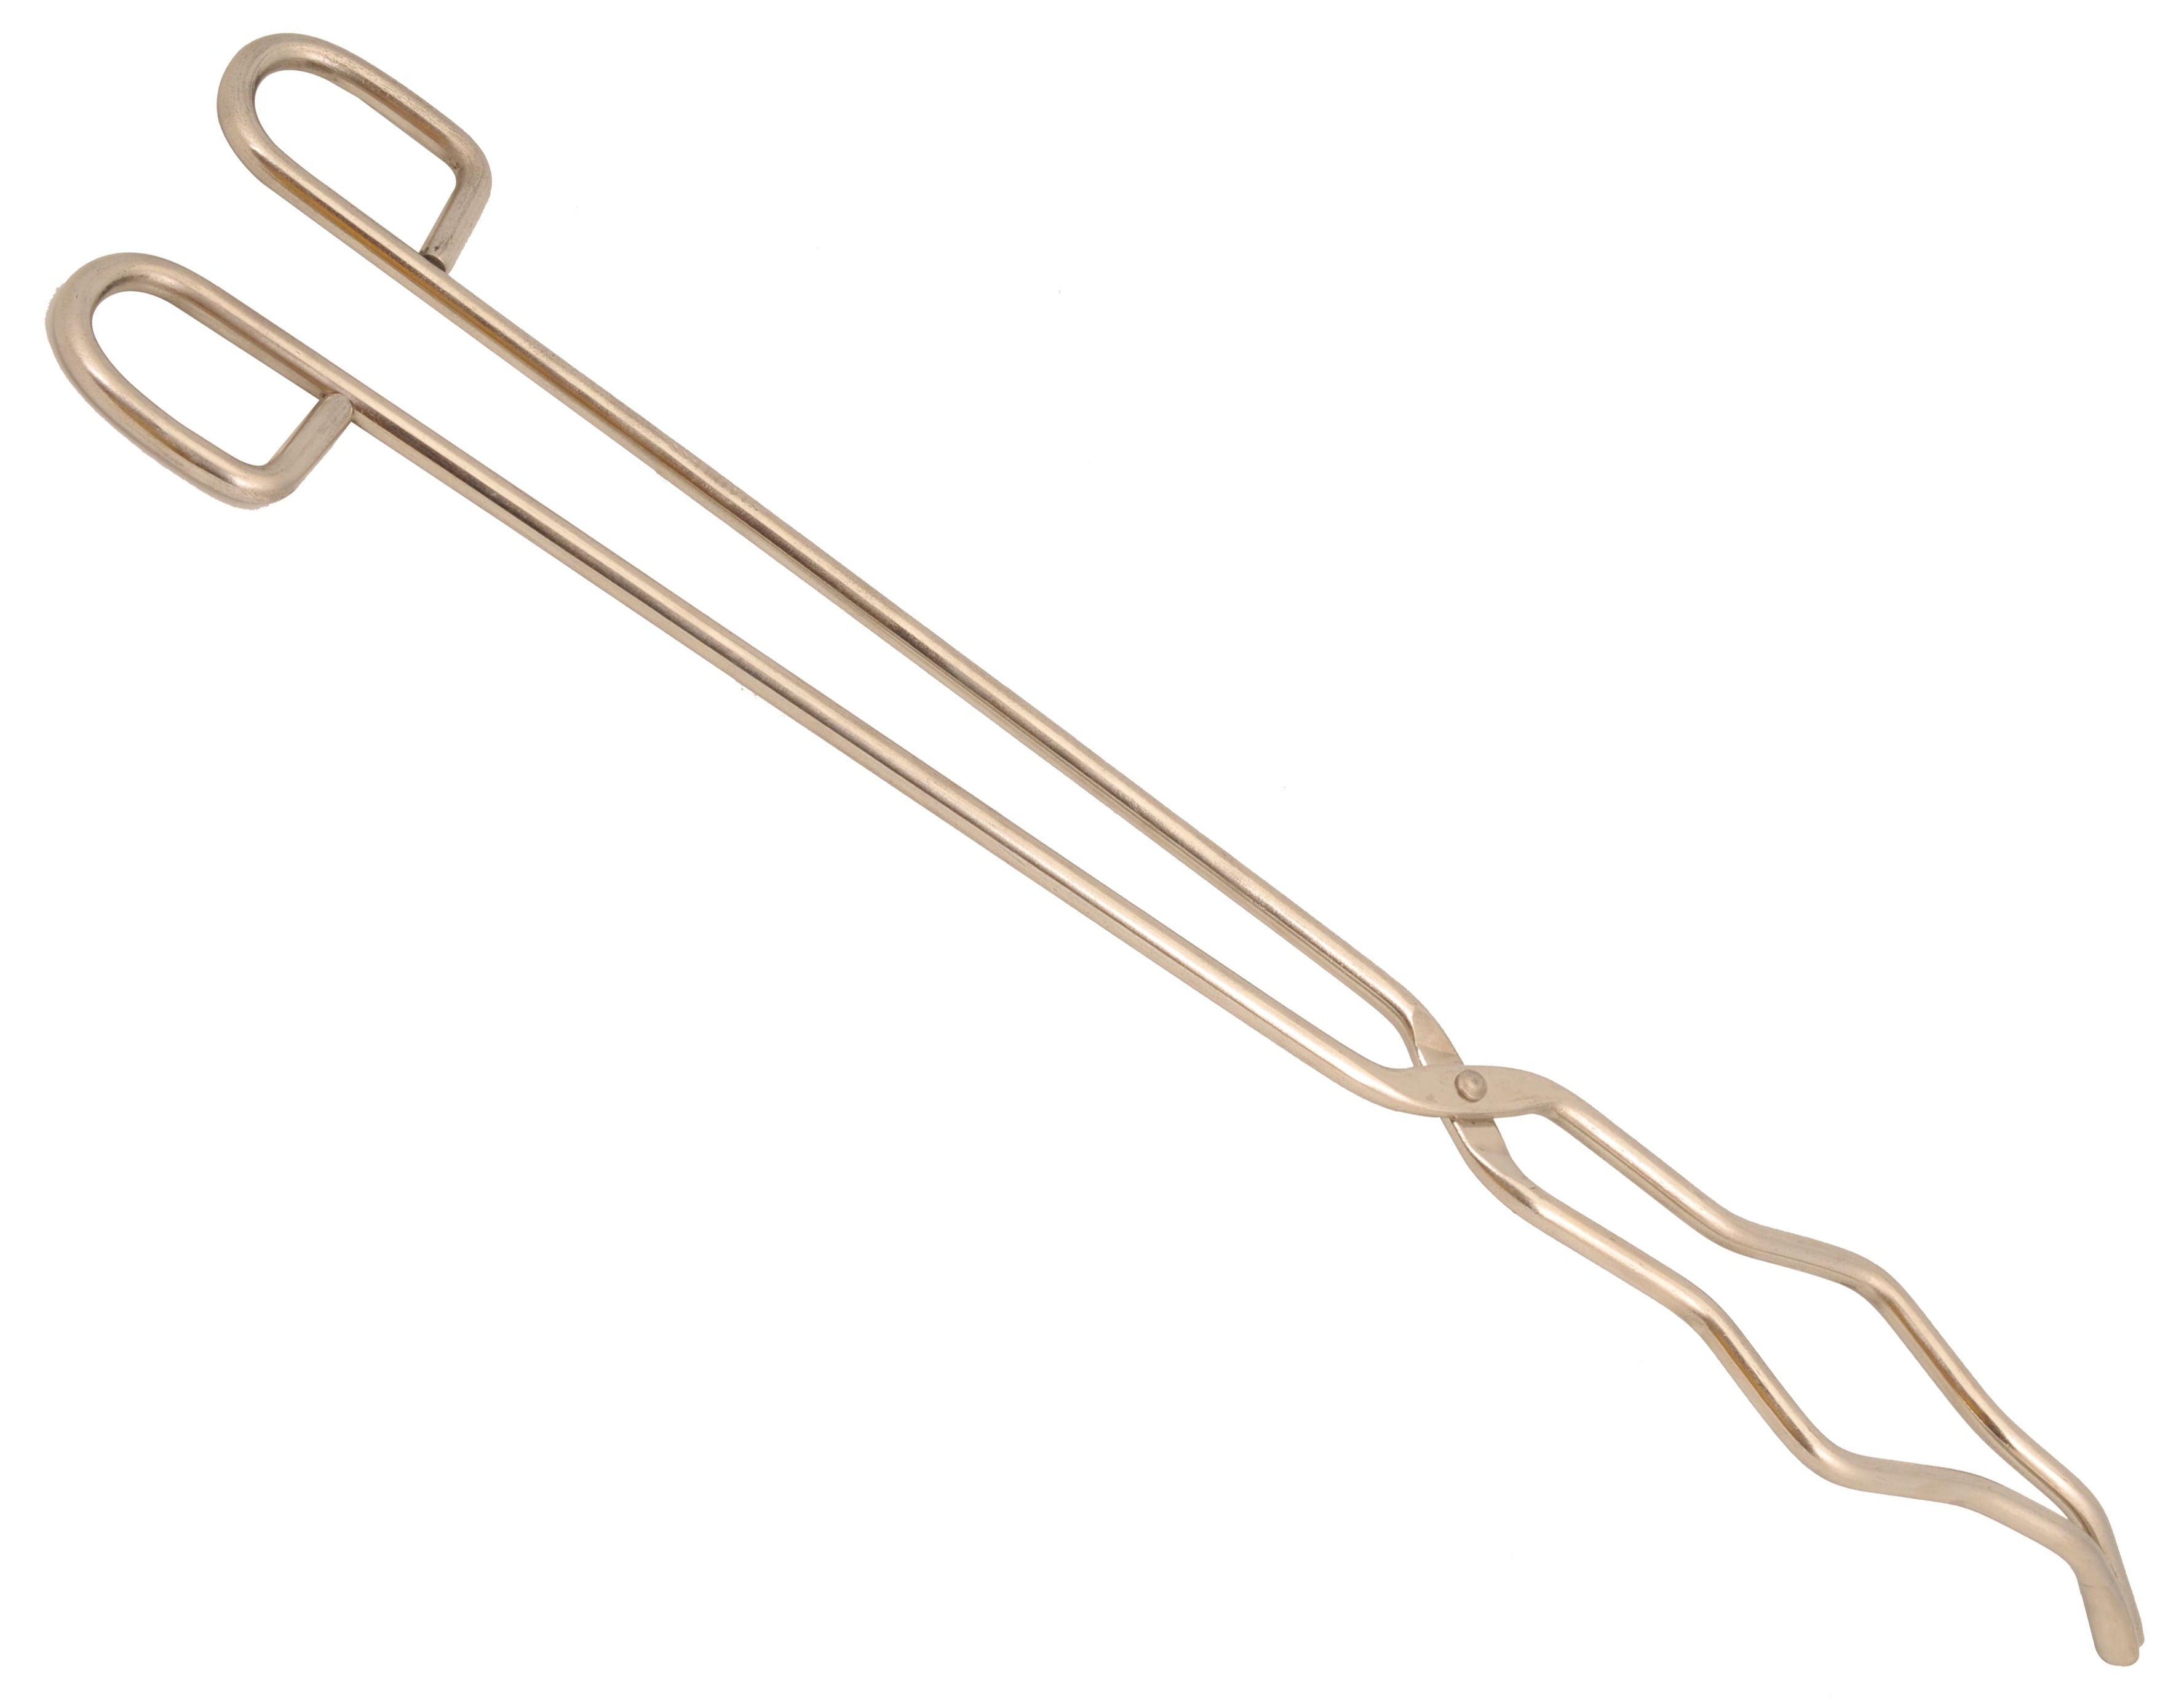 Crucible Tongs with Bow- Straight, Serrated Tips - Metal - 9.5 Long - Eisco Labs